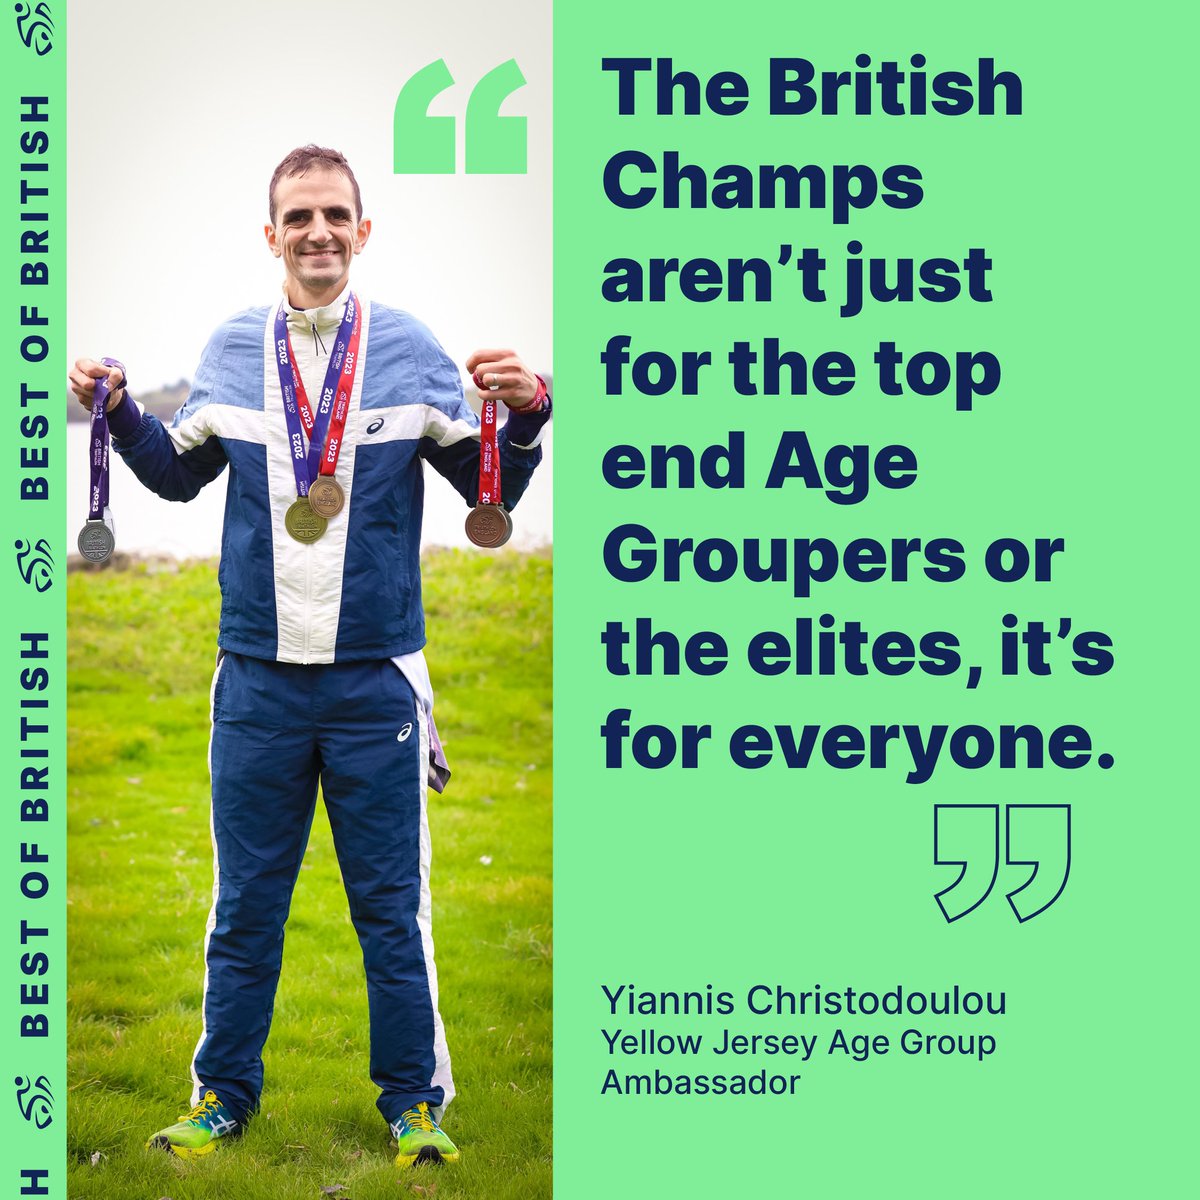 Yiannis Christodoulou, one of the @YellowJerseyUK Age Group Ambassadors, reflects on the British Championship season, that saw him compete at every race 🏊🏃🚴 Read his story ⬇️ brnw.ch/21wEvuj